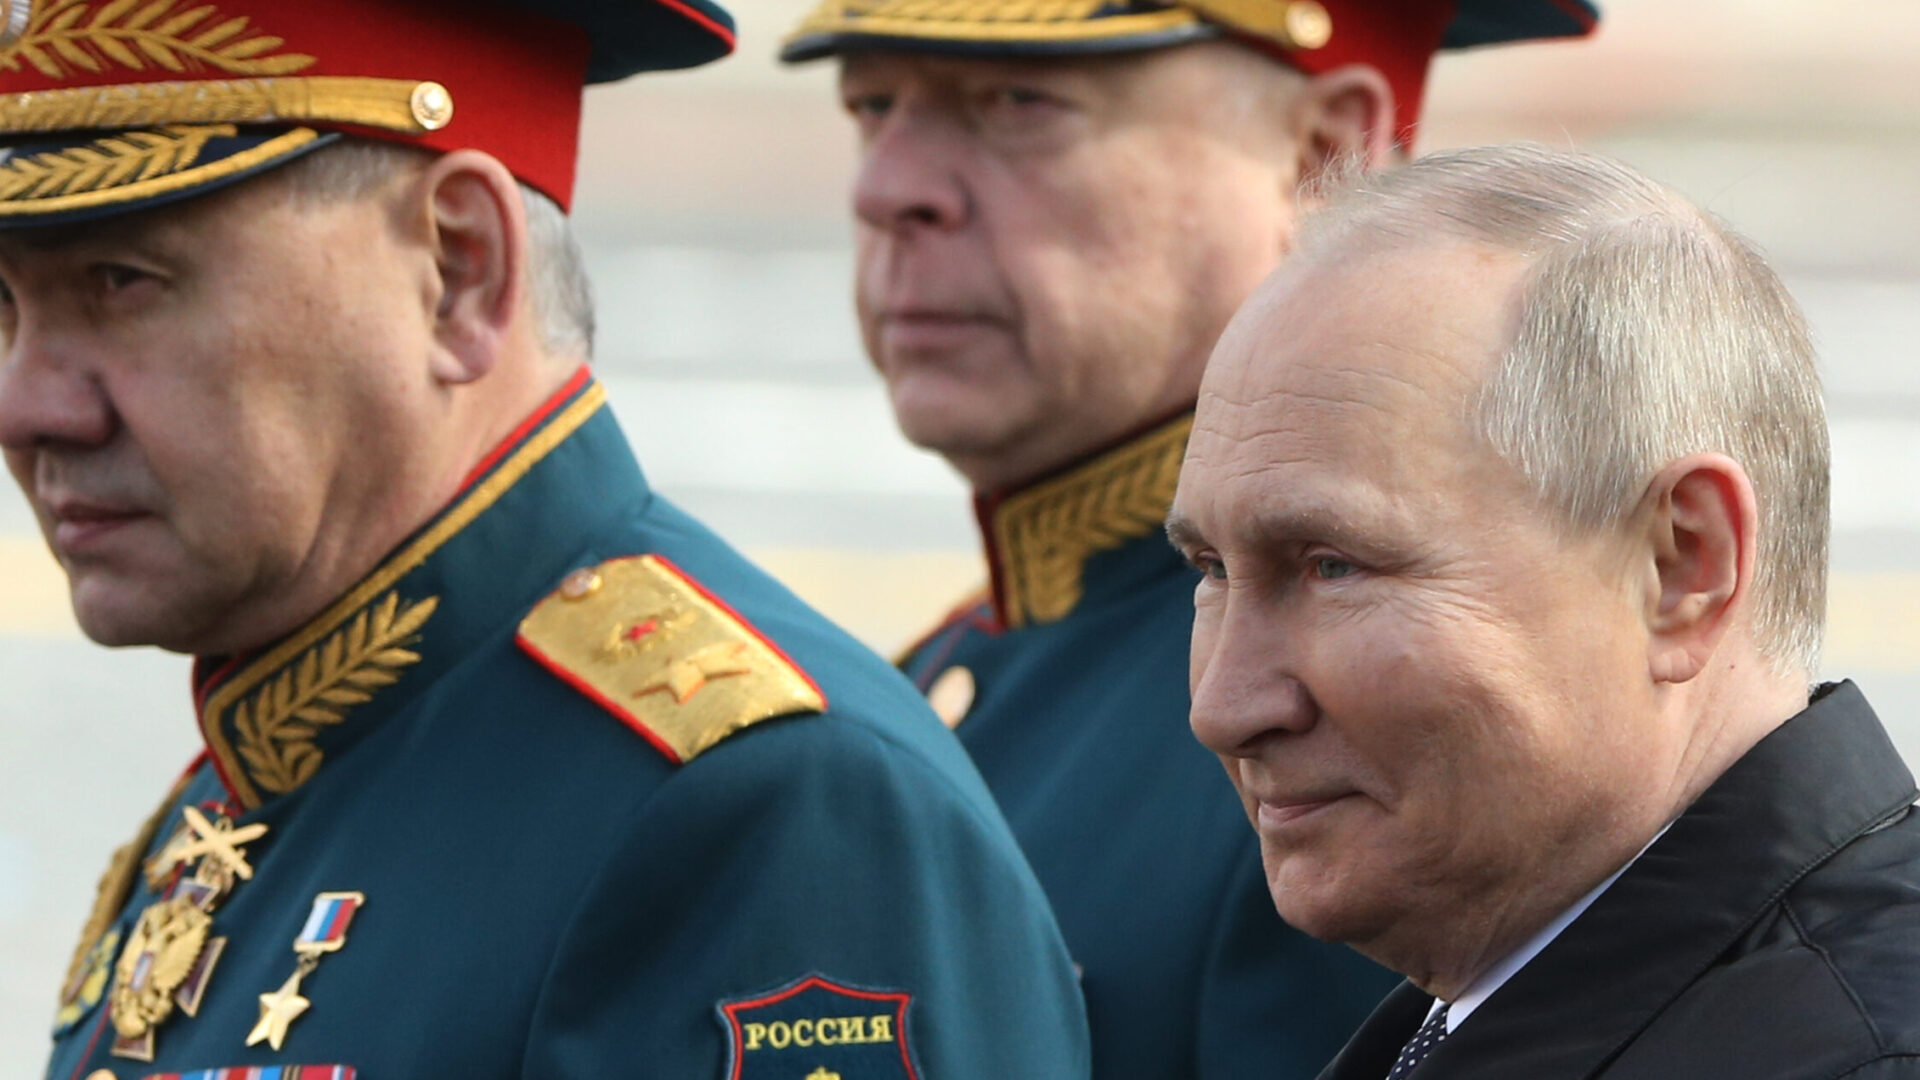 Armies and Autocrats: Why Putin's Military Failed